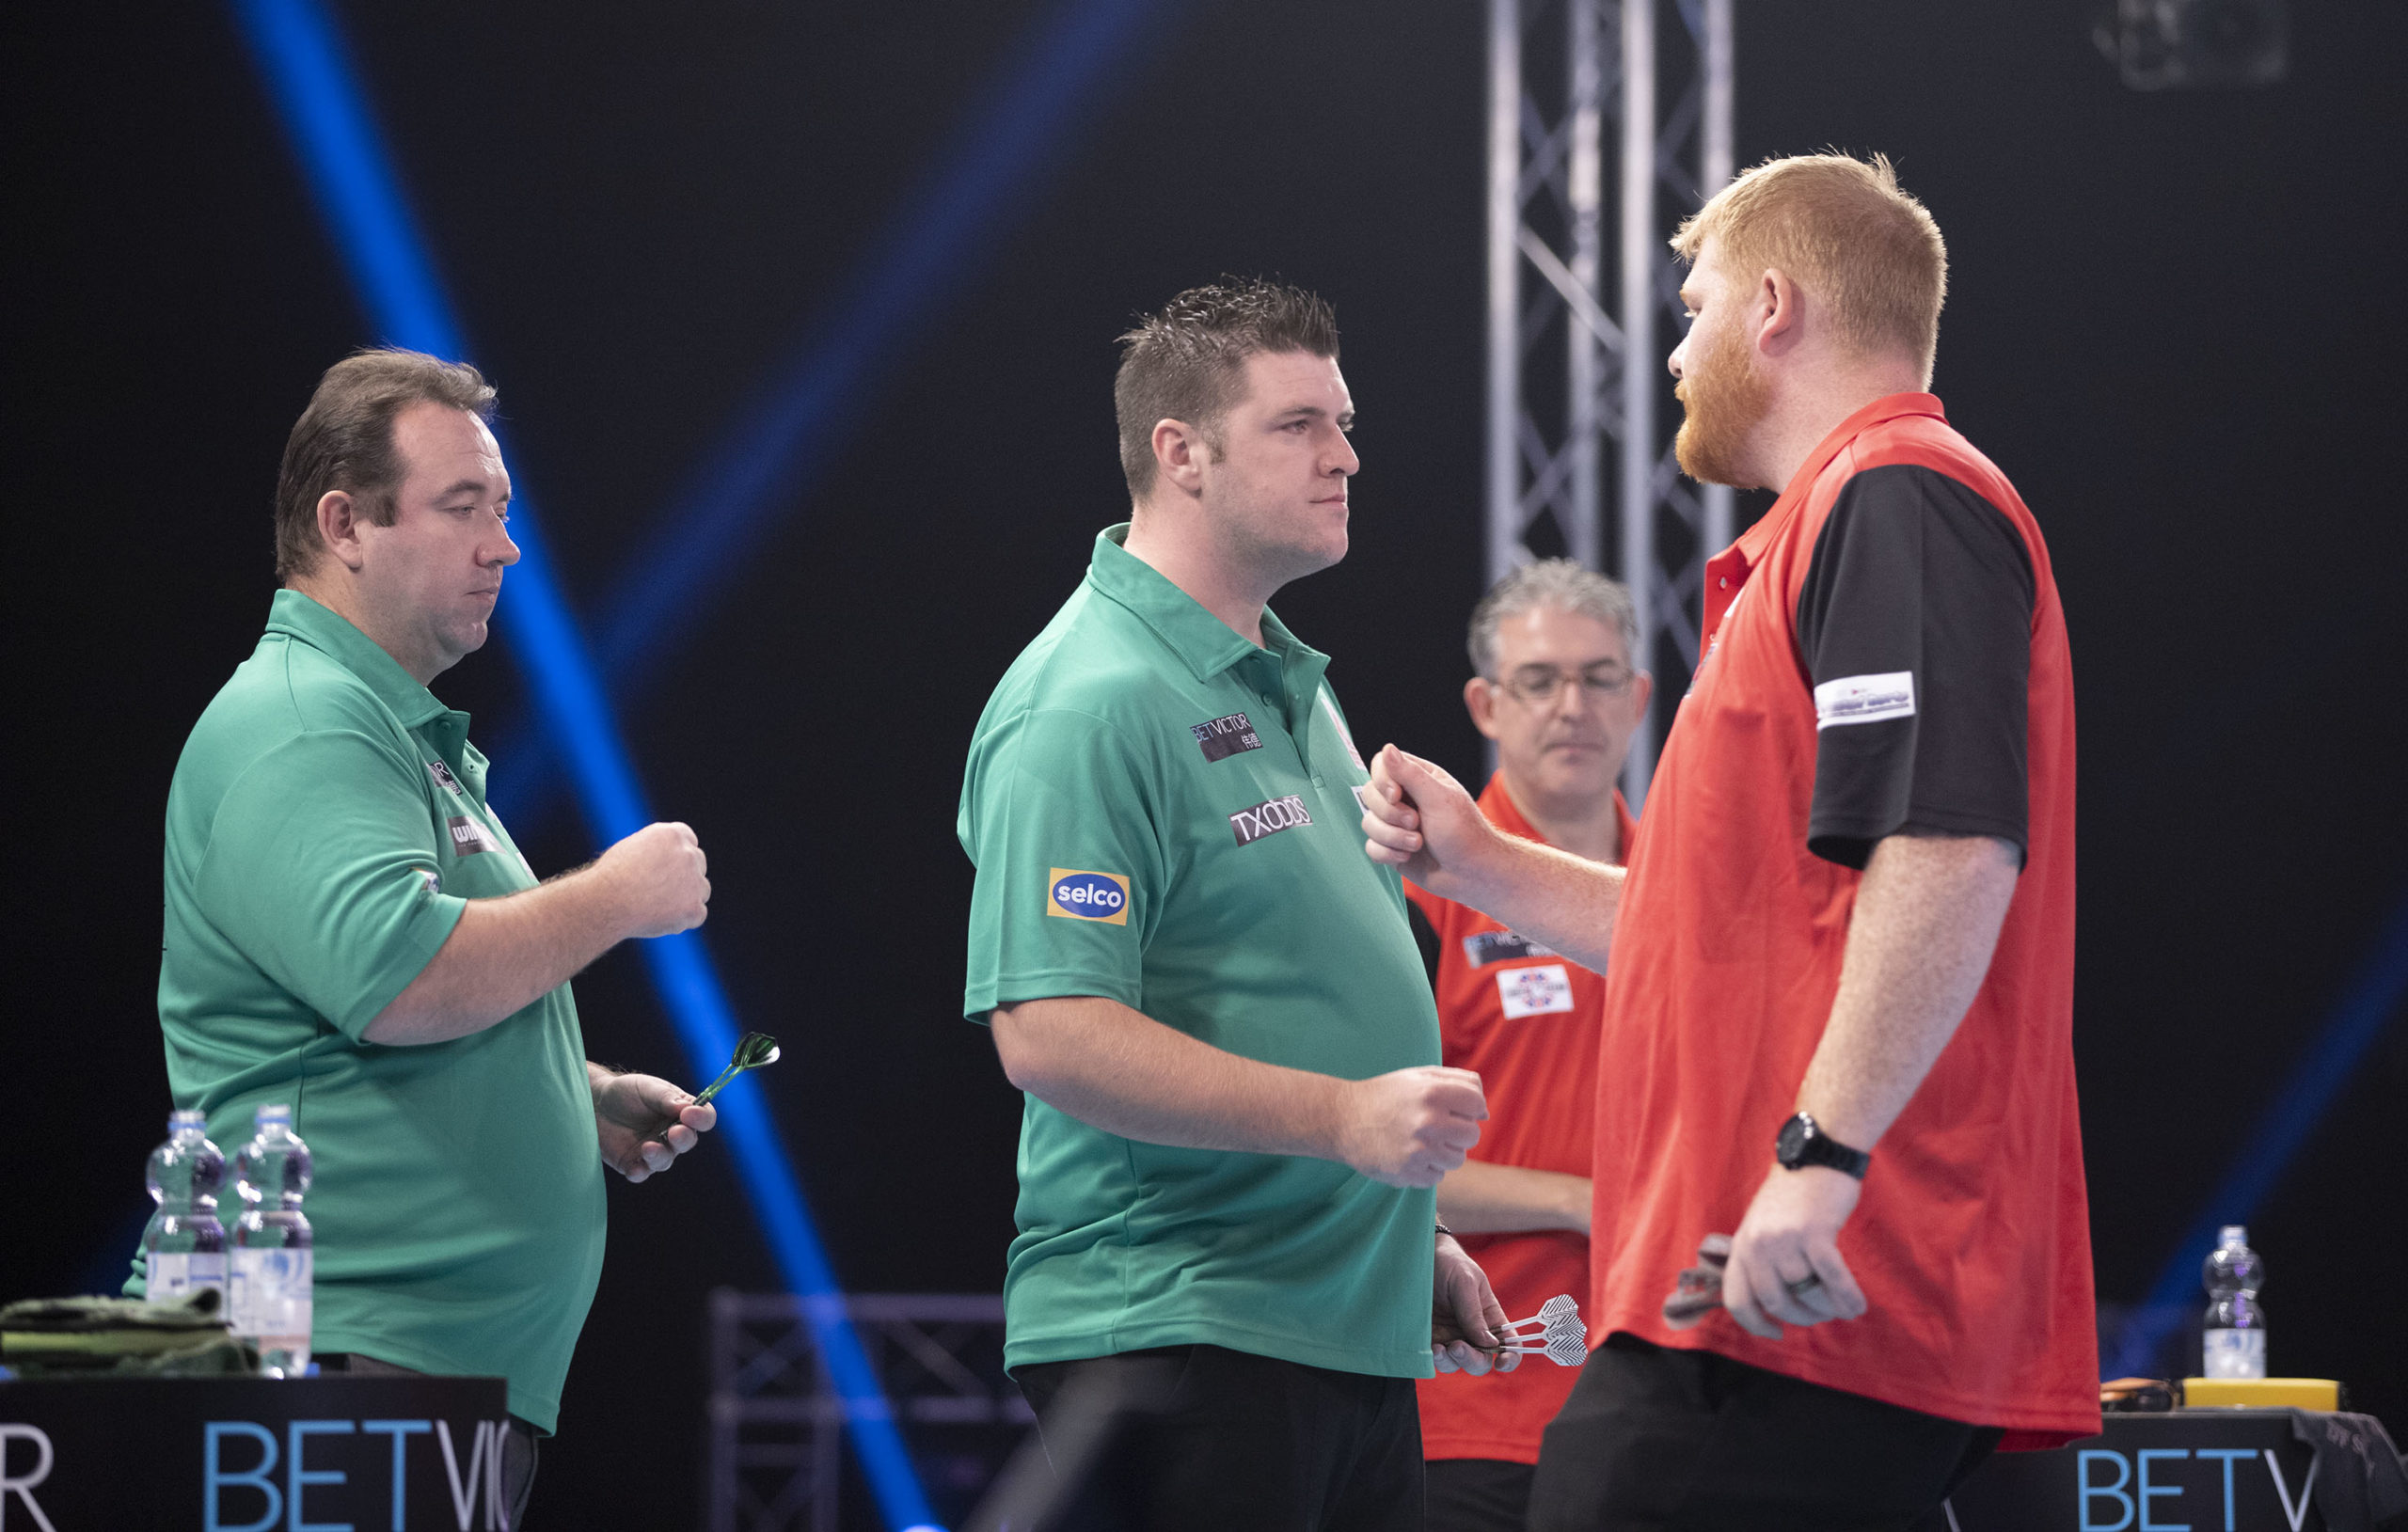 Day one of World Cup of Darts sees two seeds crash out